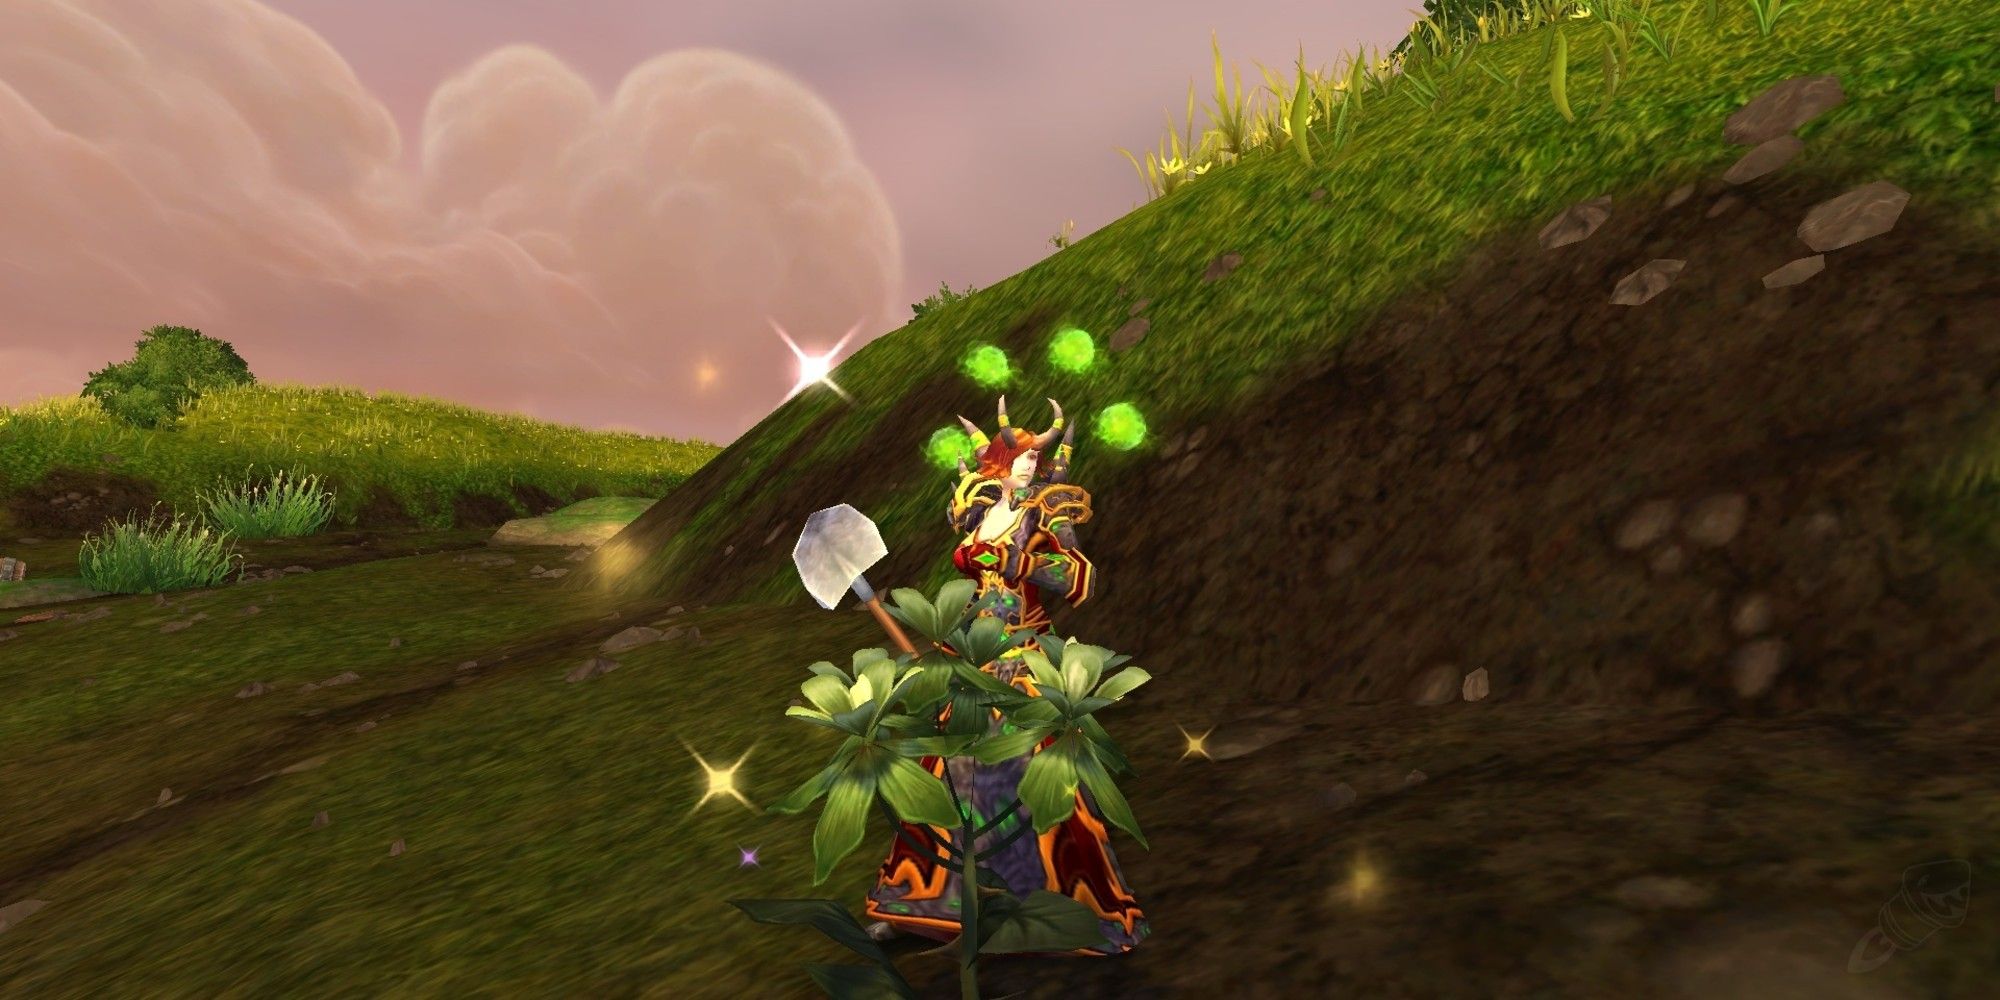 A player gathers herbs in the Herbalist profession in World of Warcraft